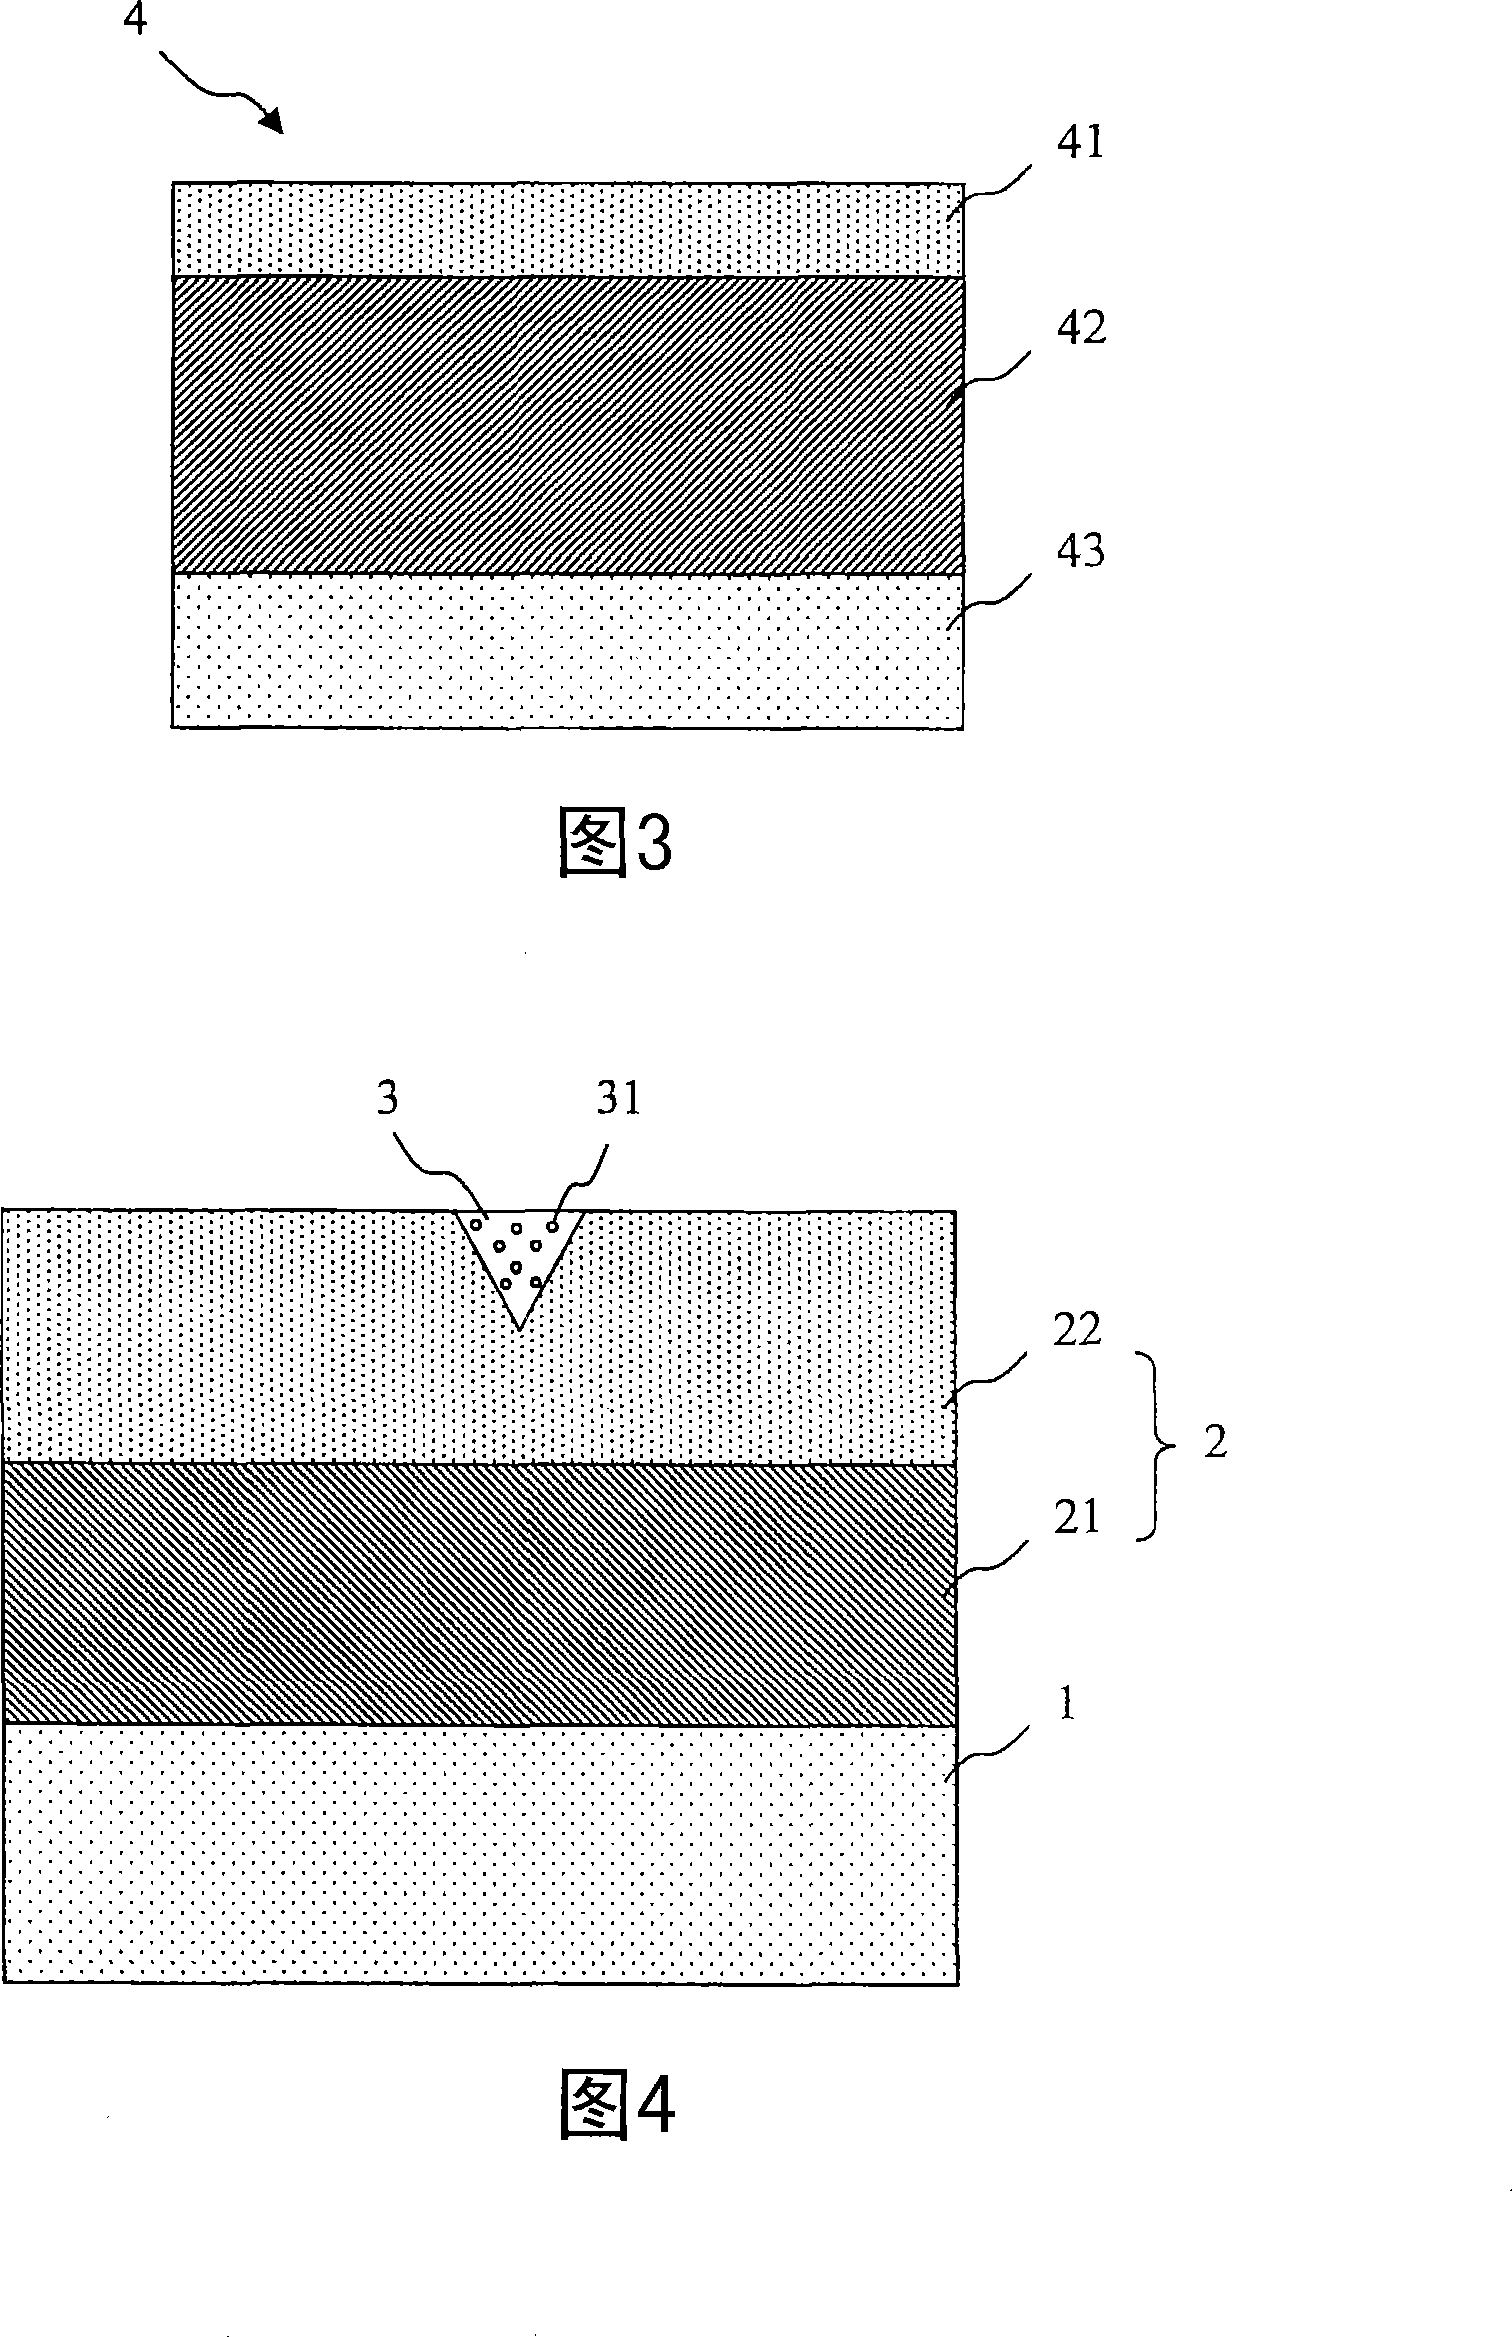 Liquid crystal display board, optoelectronic device and repairing method thereof